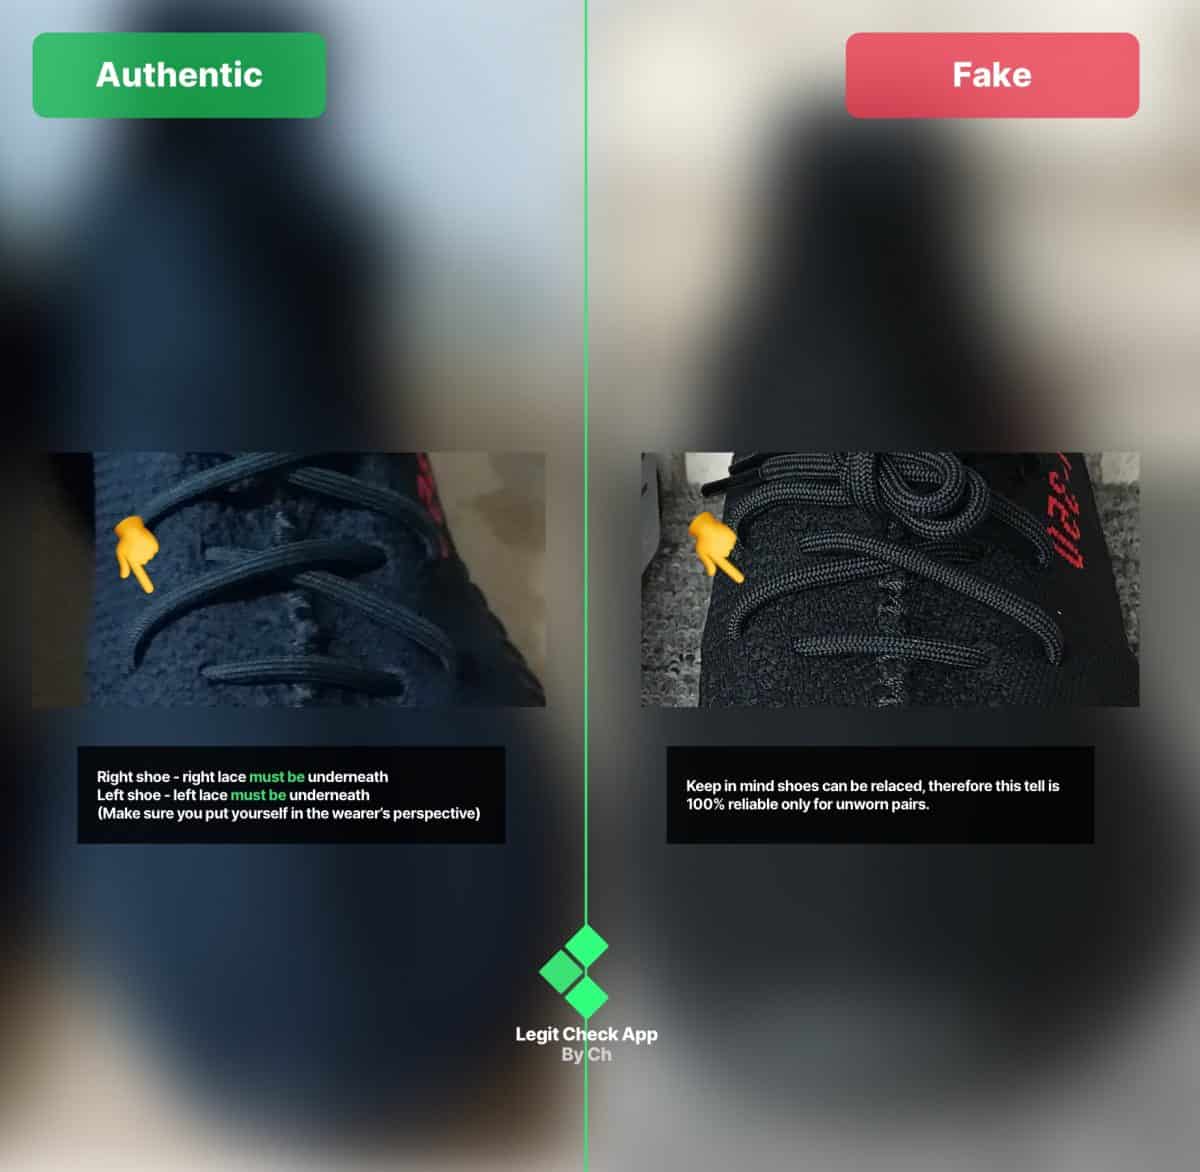 Comparing two real vs fake Yeezy Bred pairs side-by-side for their lacing styles